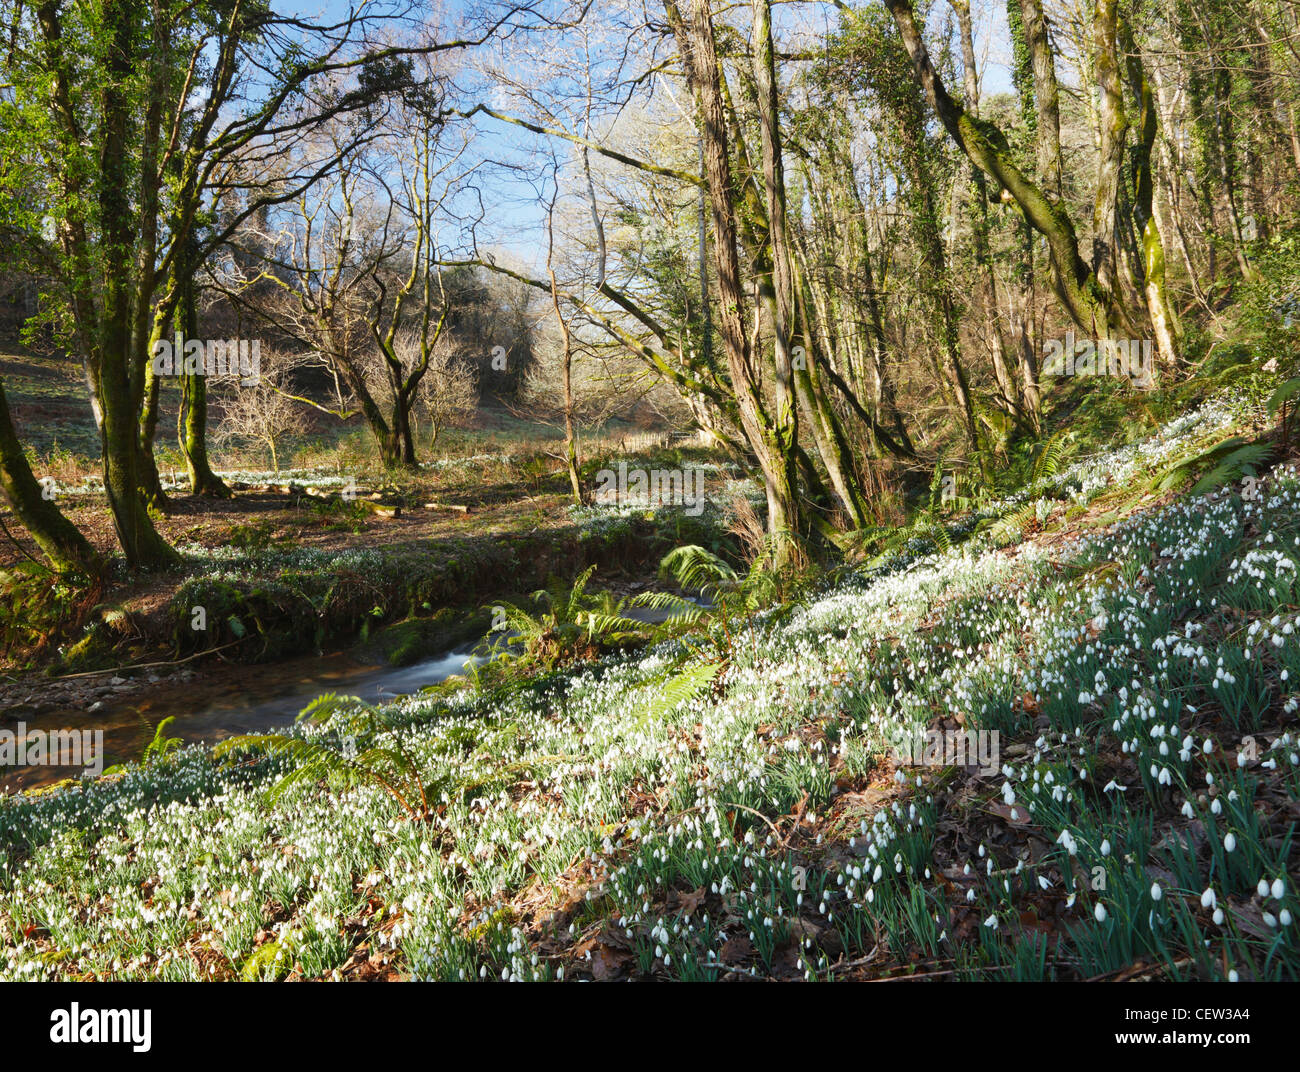 Bois du Nord Hawkwell AKA Snowdrop Valley. Parc National d'Exmoor. Le Somerset. L'Angleterre. UK. Banque D'Images